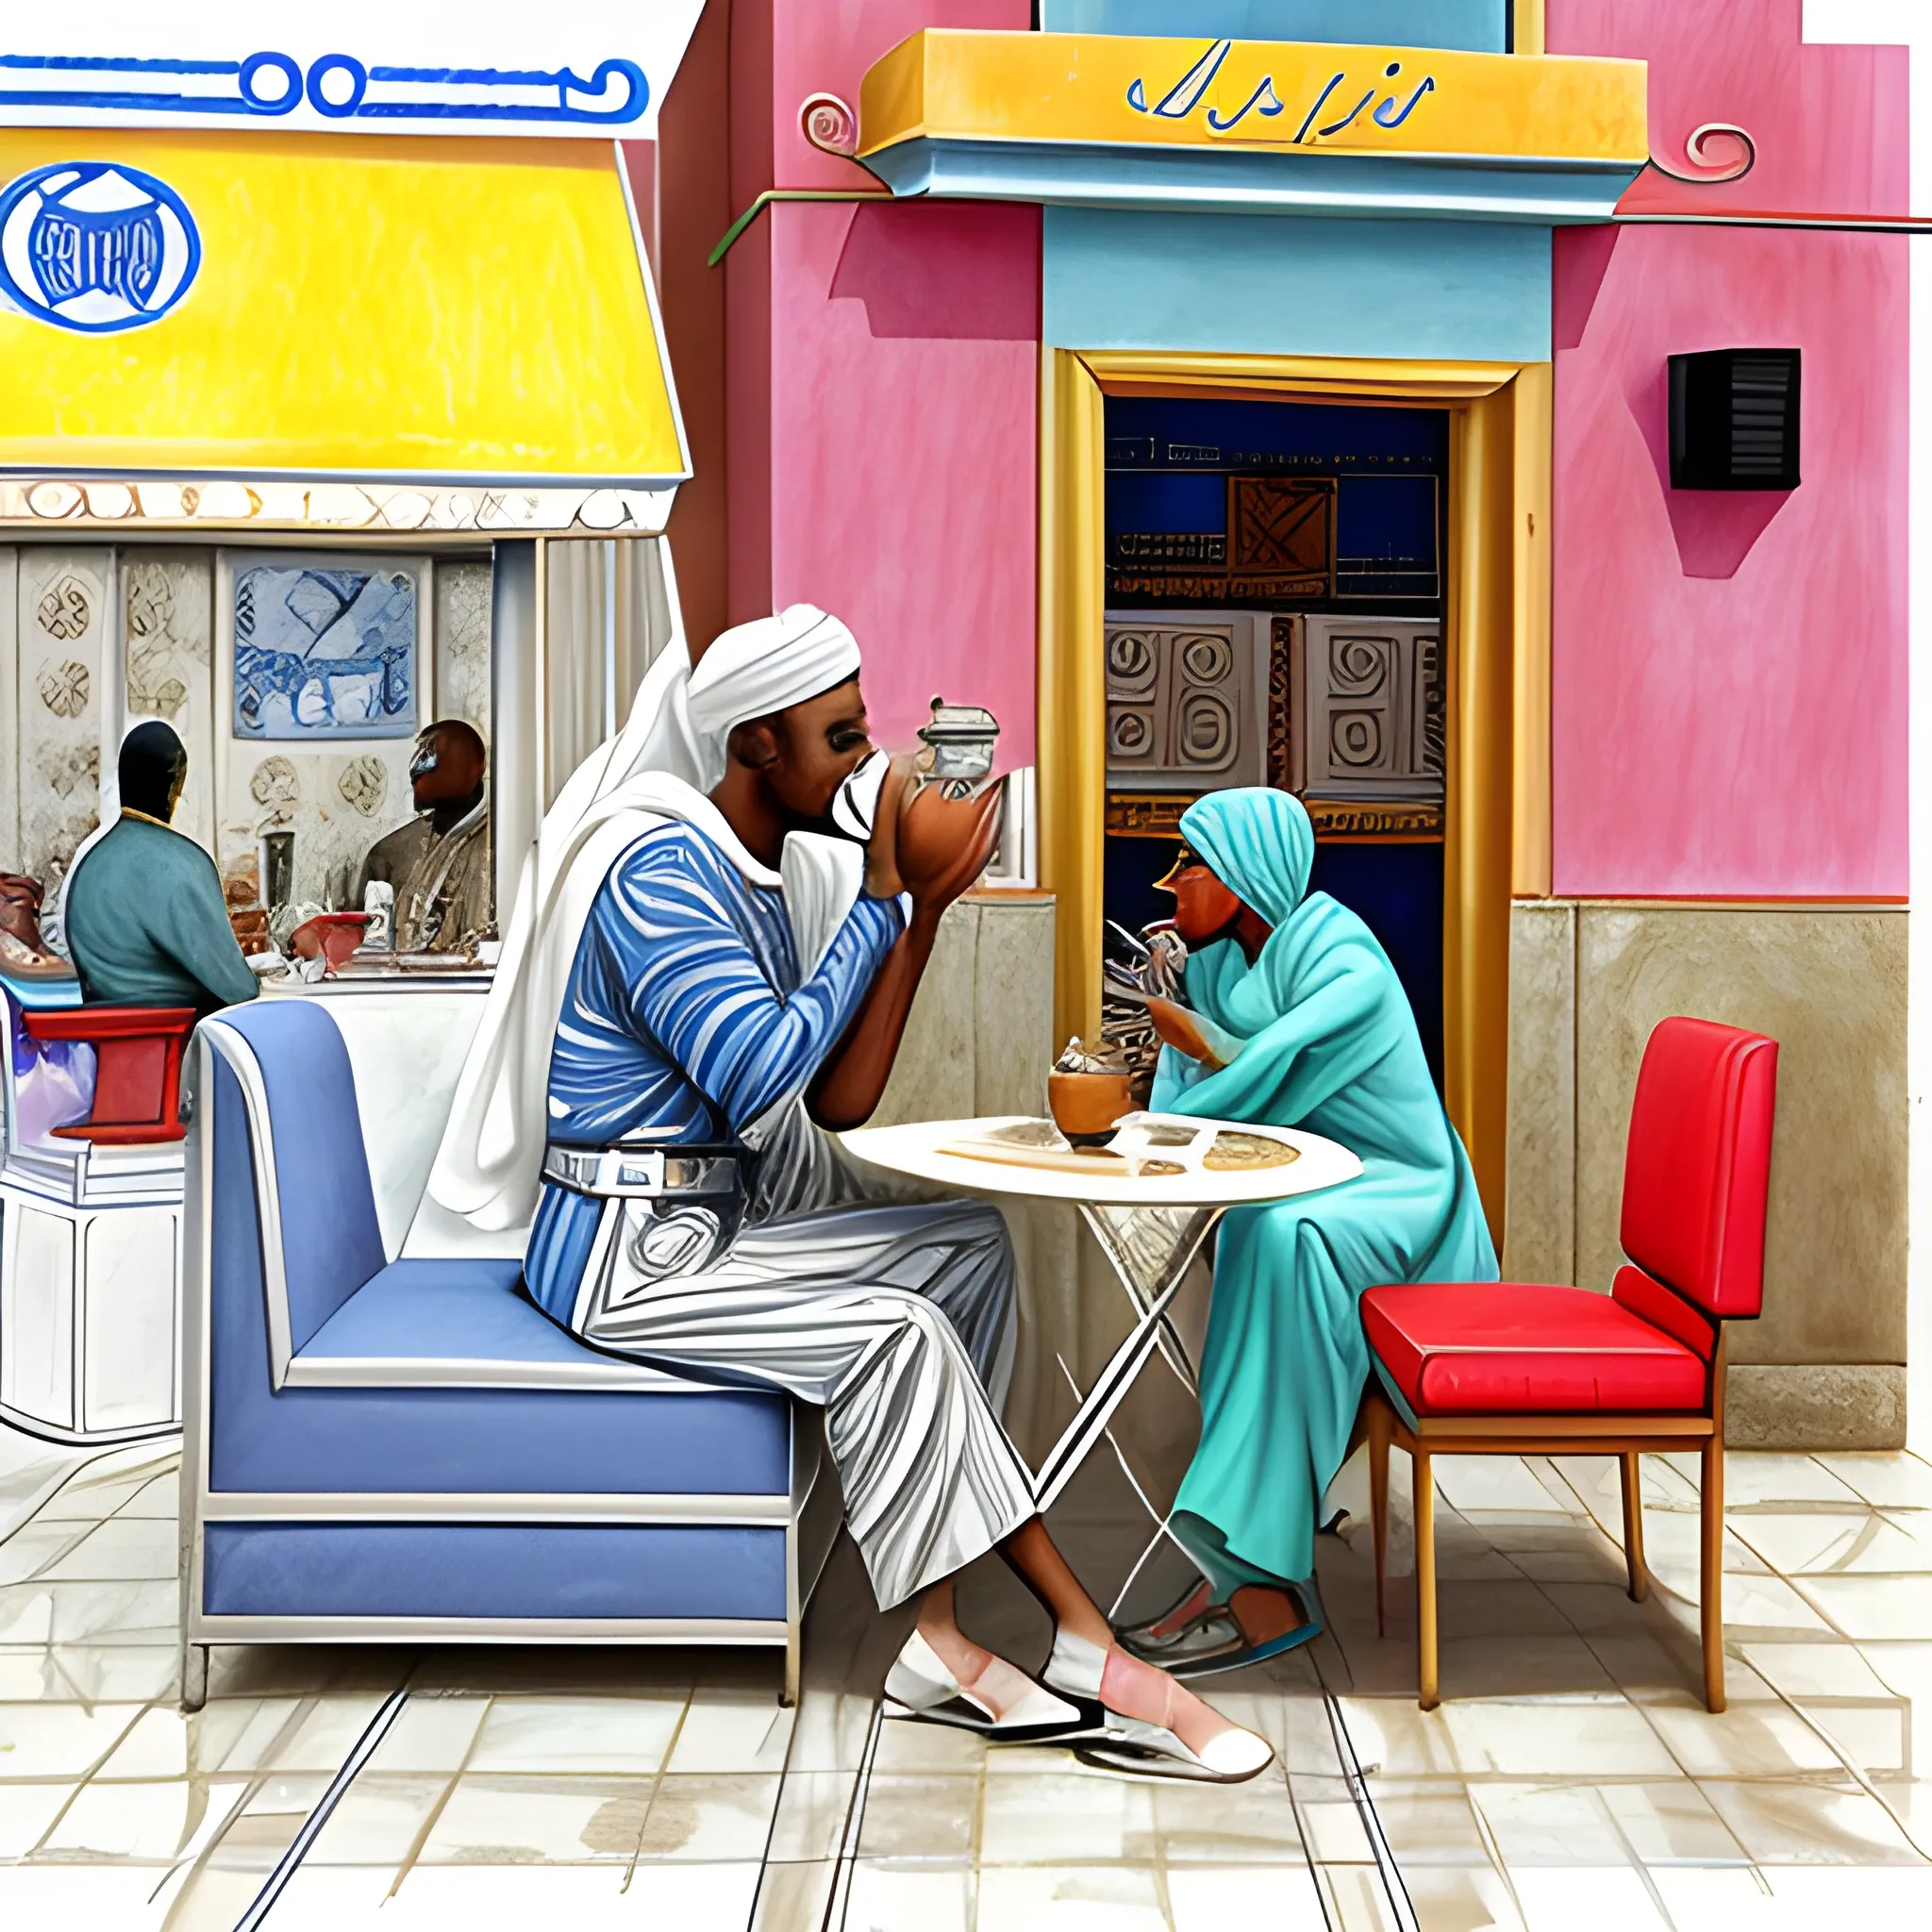 1960's Somalian man wearing a mix of 1960's greek fashion and Somalian clothes, drinking coffee at a cafe, greek and Somali architecture, drawn in Jean Giiraud, Cartoon, Trippy, Cartoon, 3D, Pencil Sketch, Water Color, Oil Painting